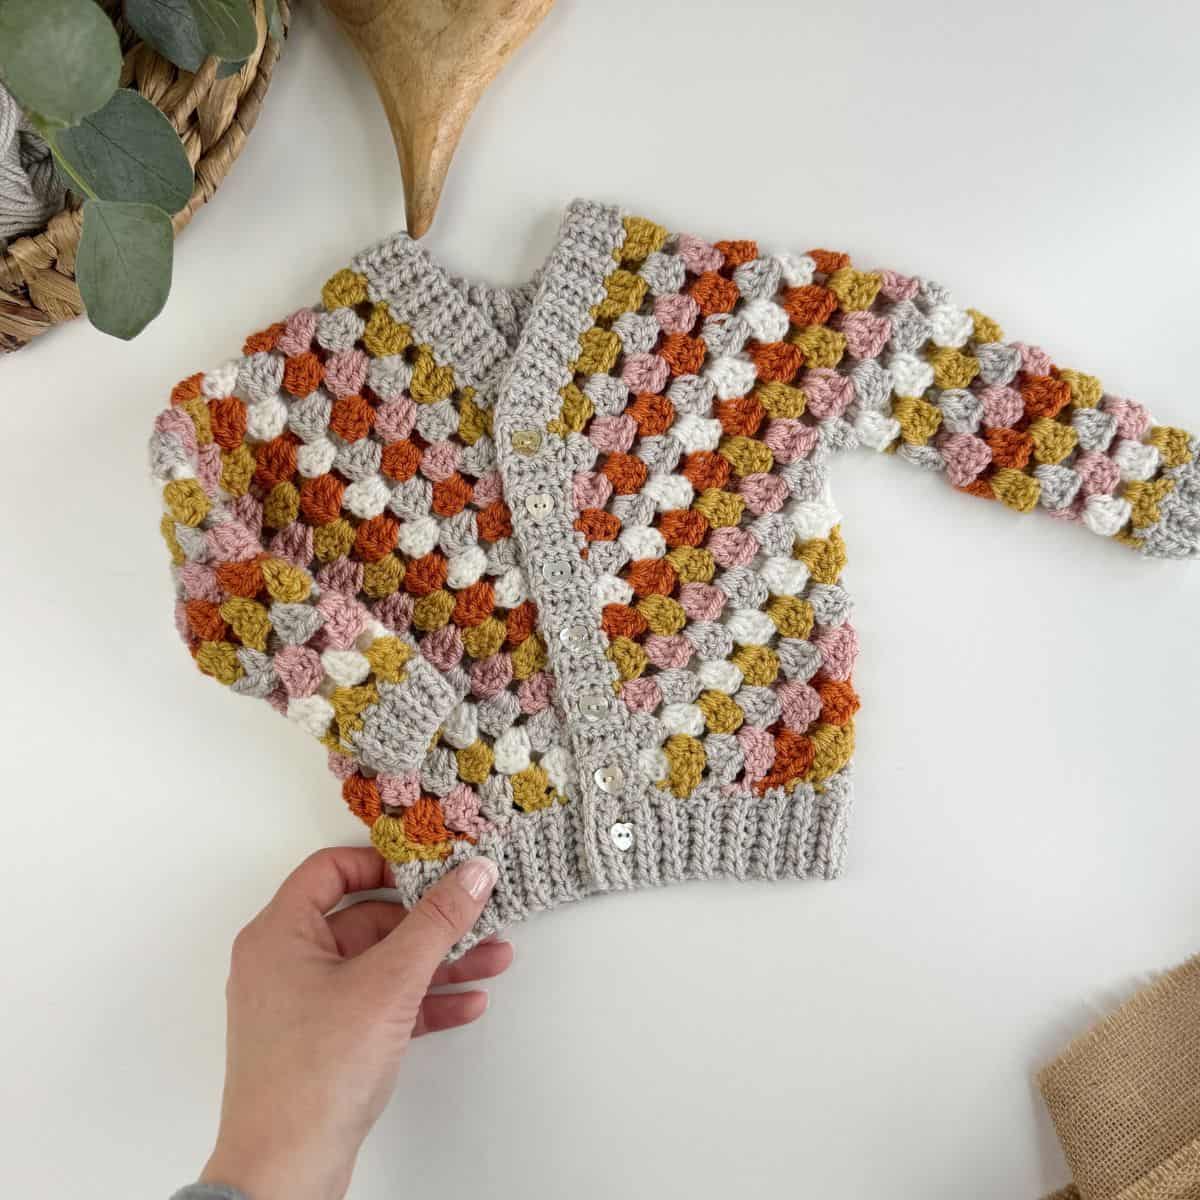 Creating a Kids Crochet Cardigan with the Classic Granny Stitch